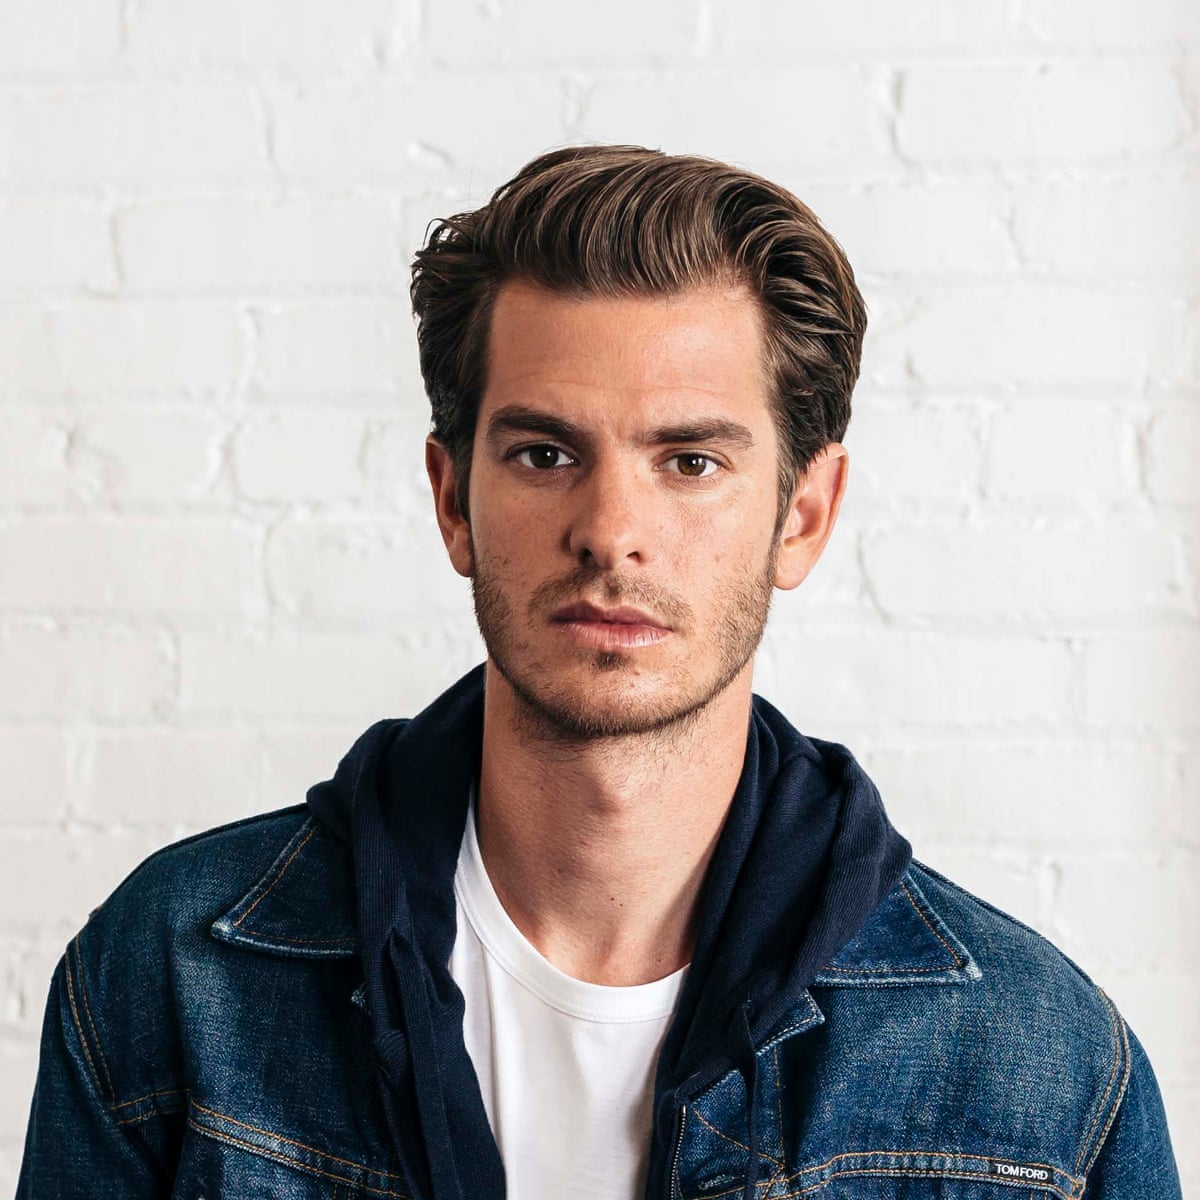 How old is andrew garfield